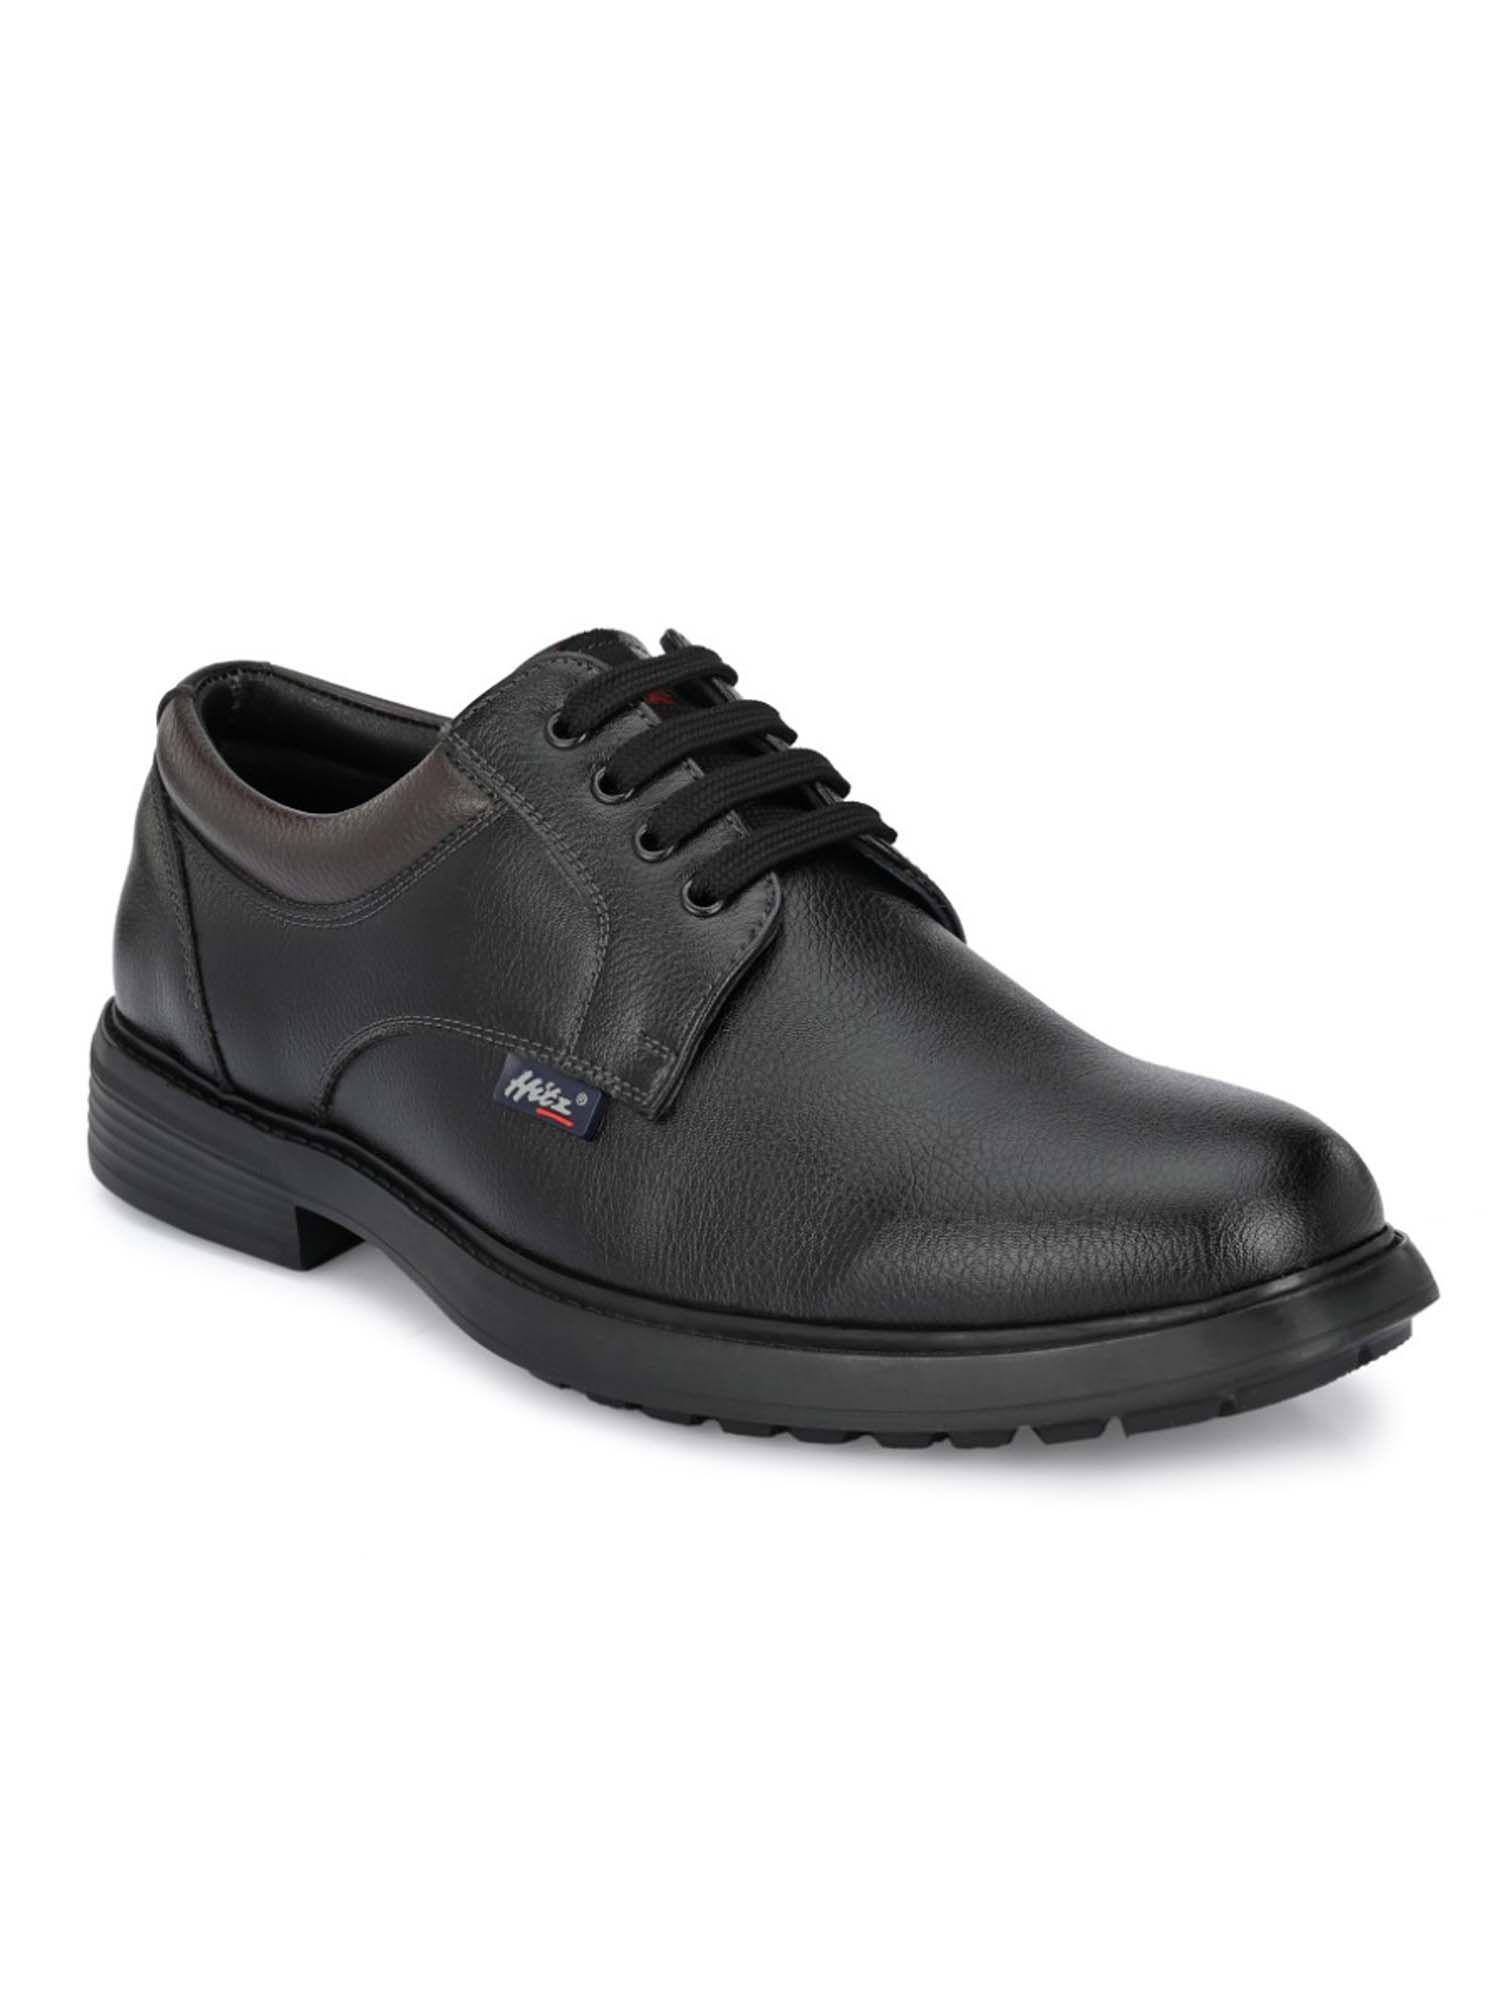 men's black synthetic lace-up casual shoes